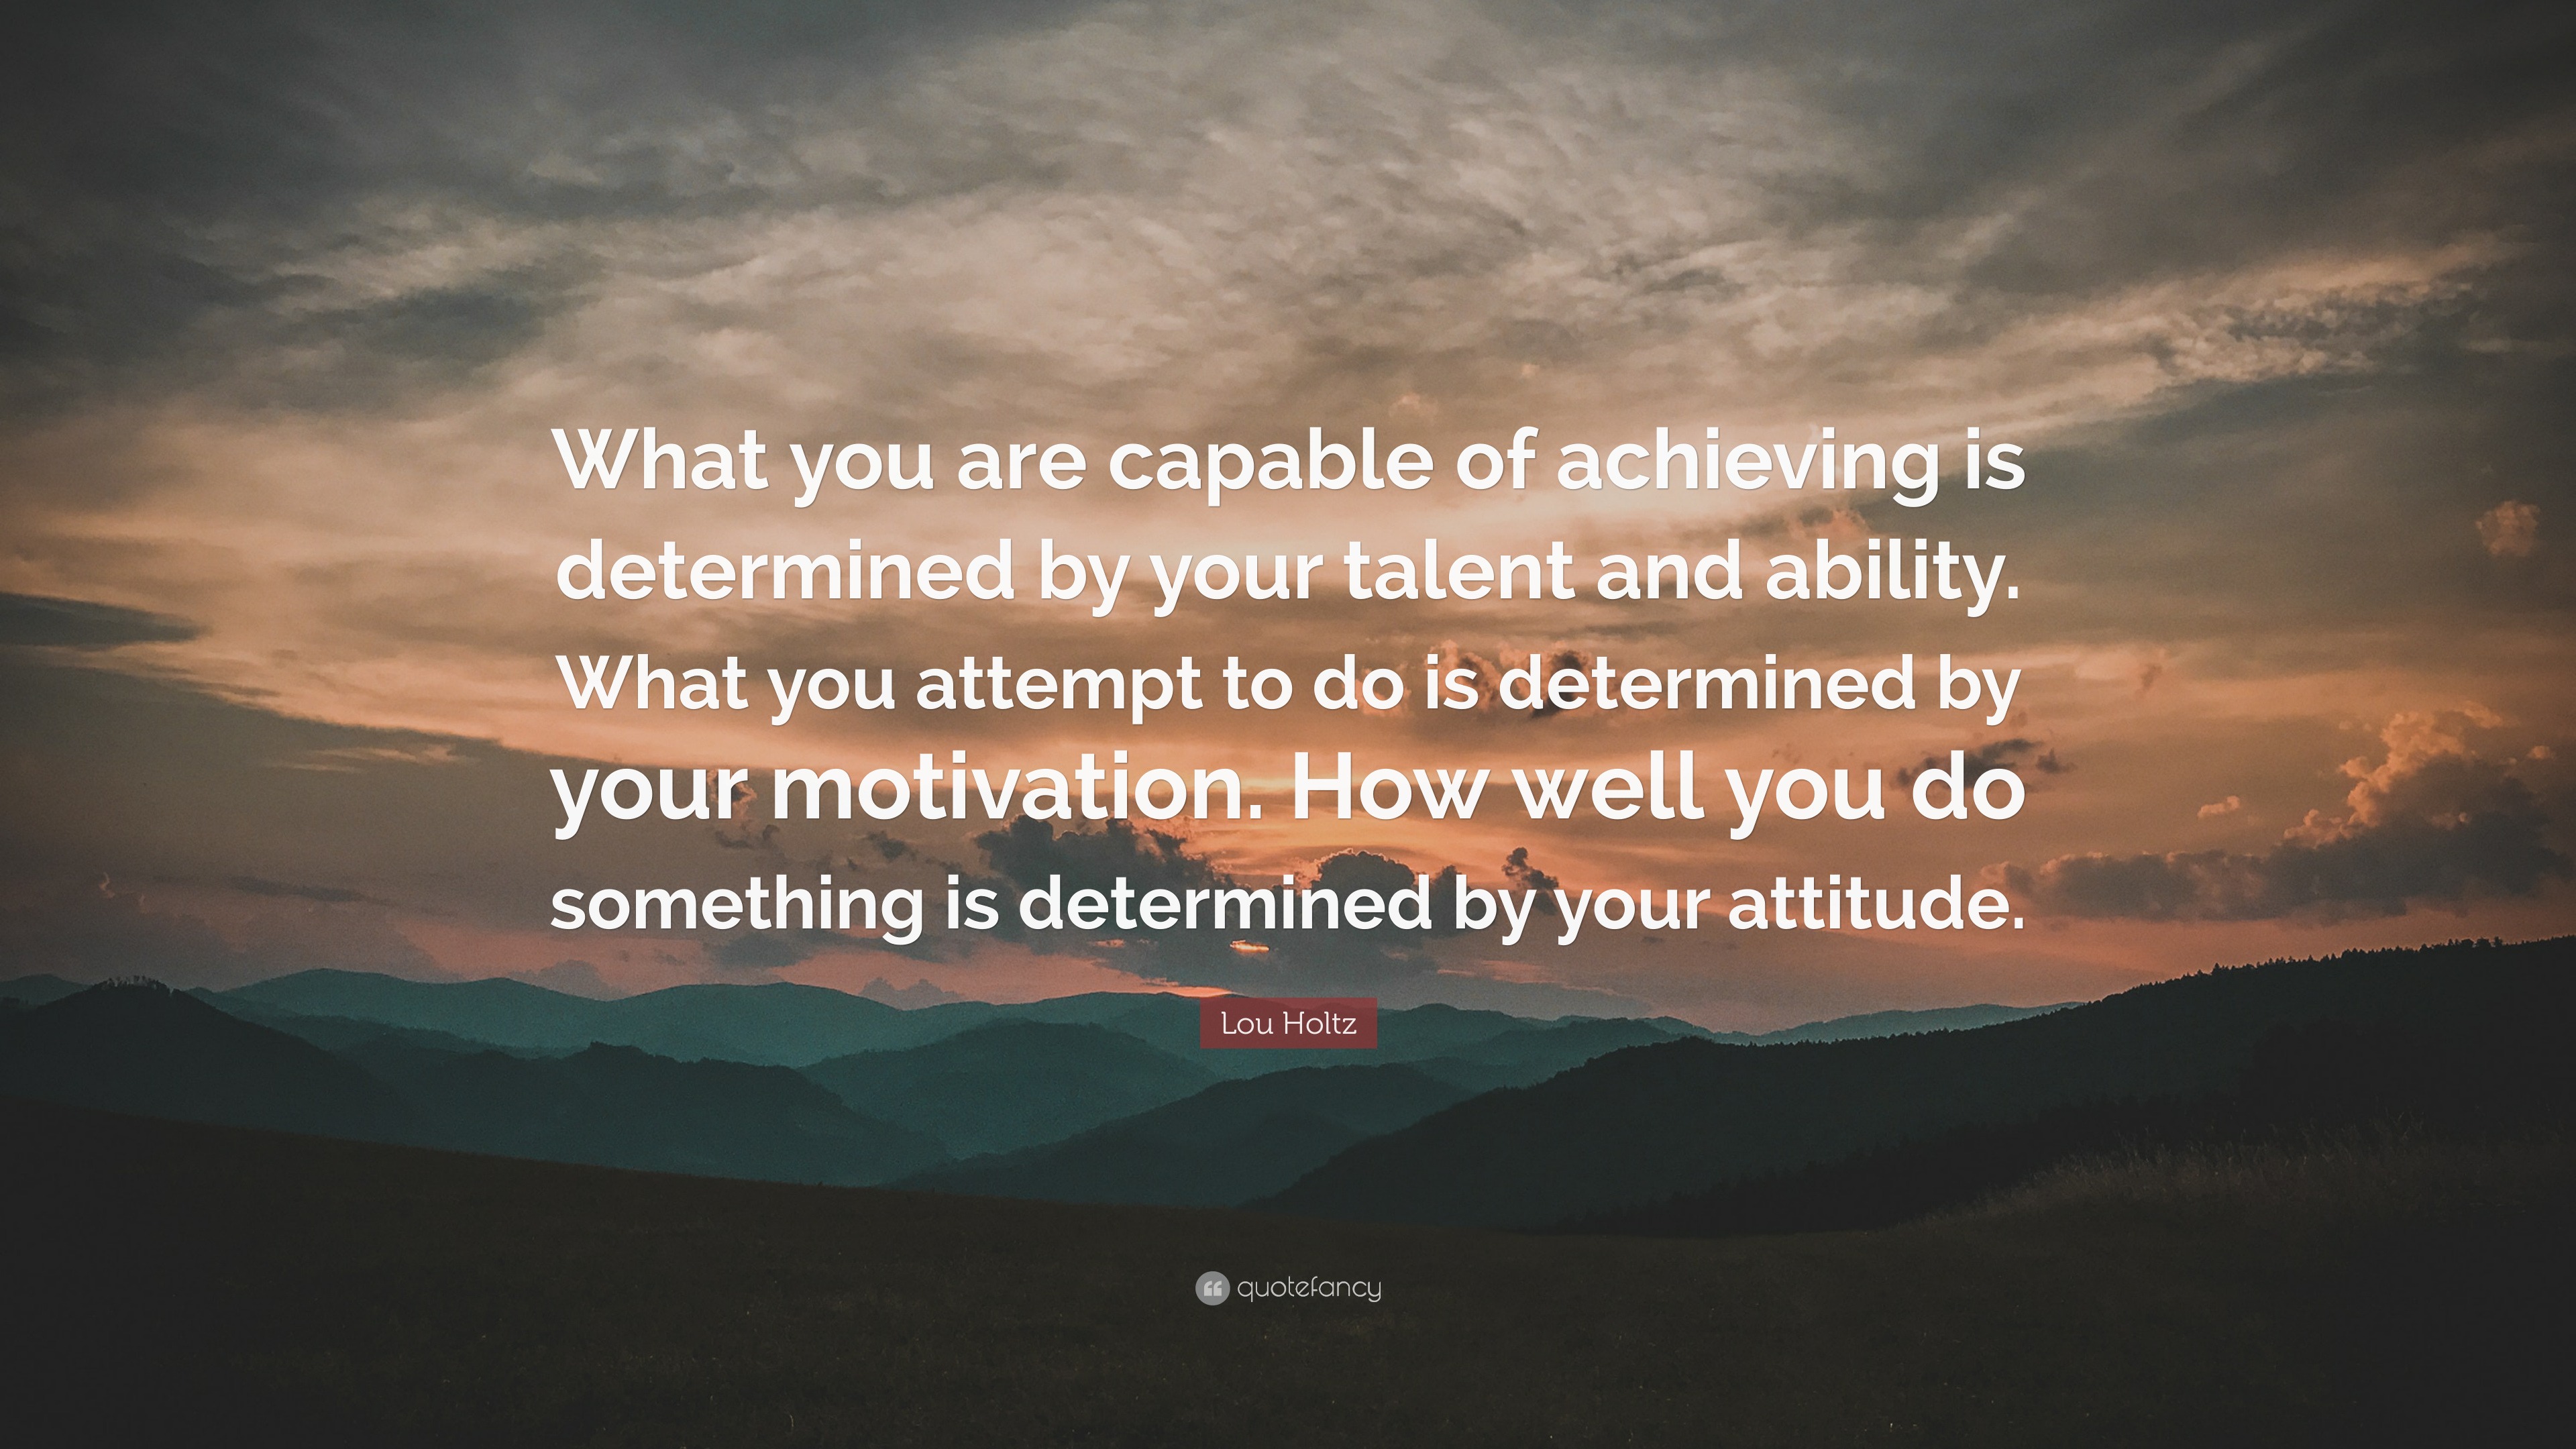 Lou Holtz Quote: “What you are capable of achieving is determined by